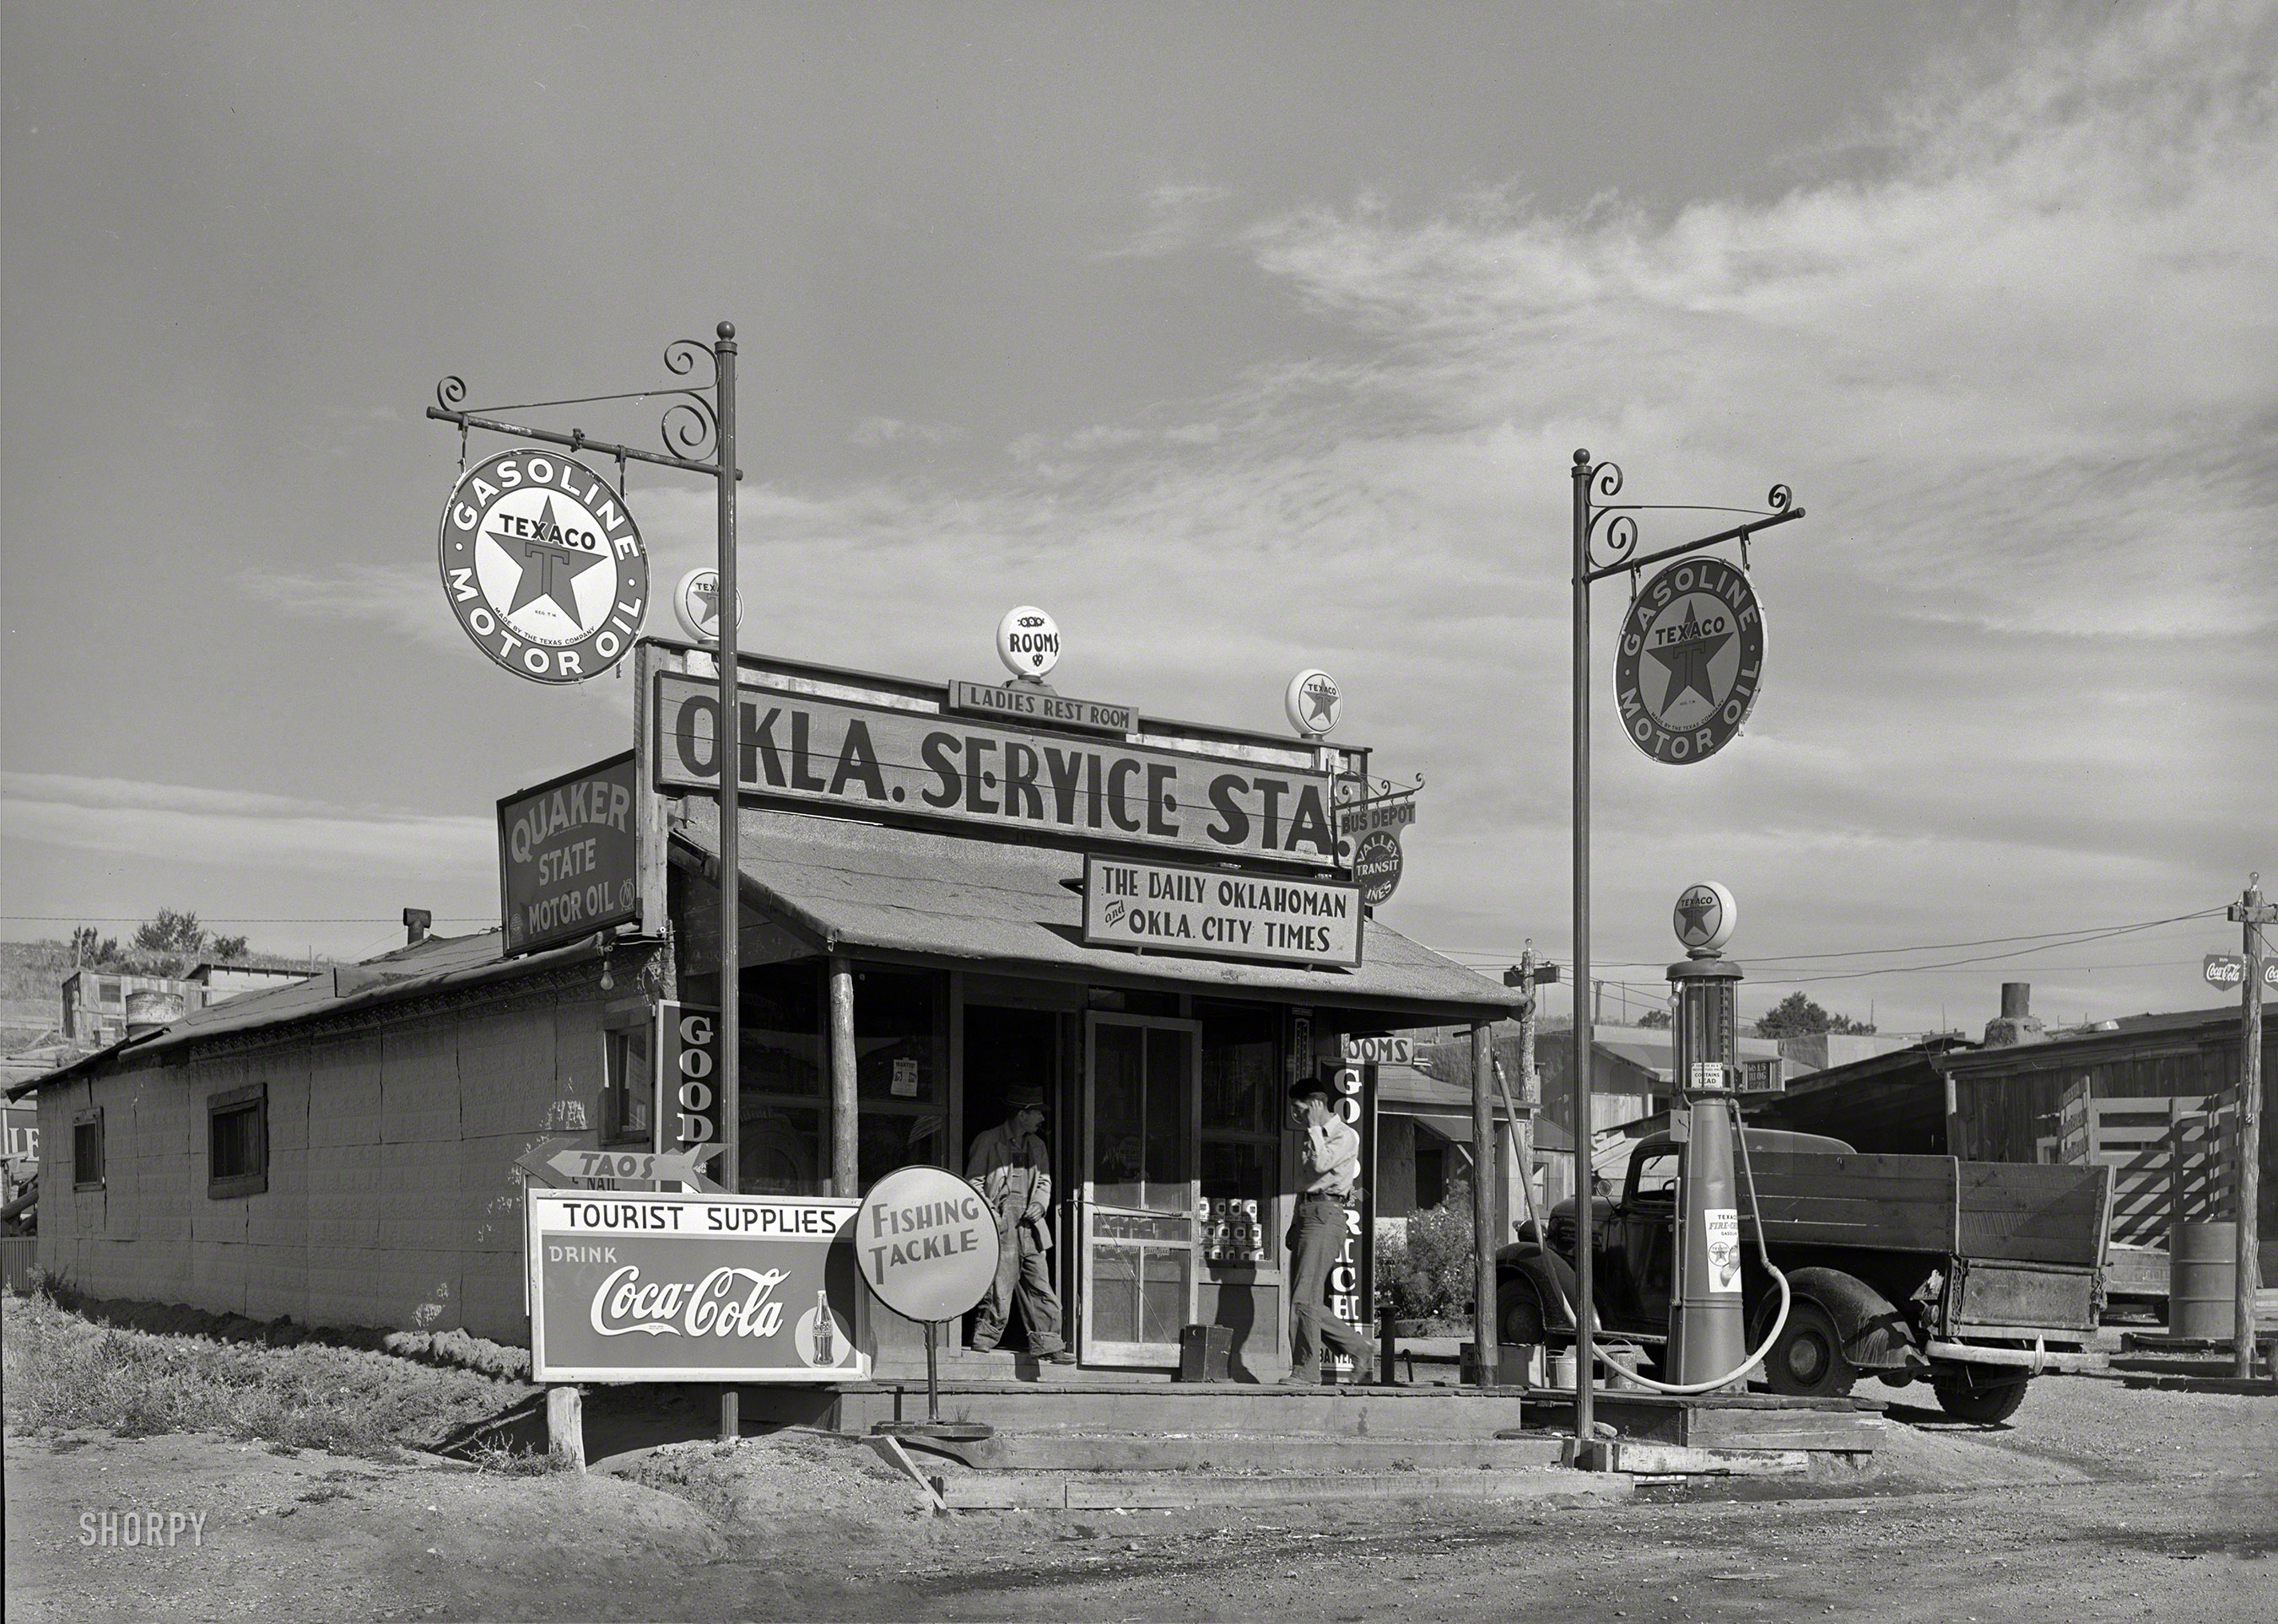 September 1939. "Service station run by former resident of Oklahoma in Questa, New Mexico. Oklahoma newspapers as well as other Oklahoma products are for sale here." Photo by Russell Lee for the Farm Security Admin. View full size.